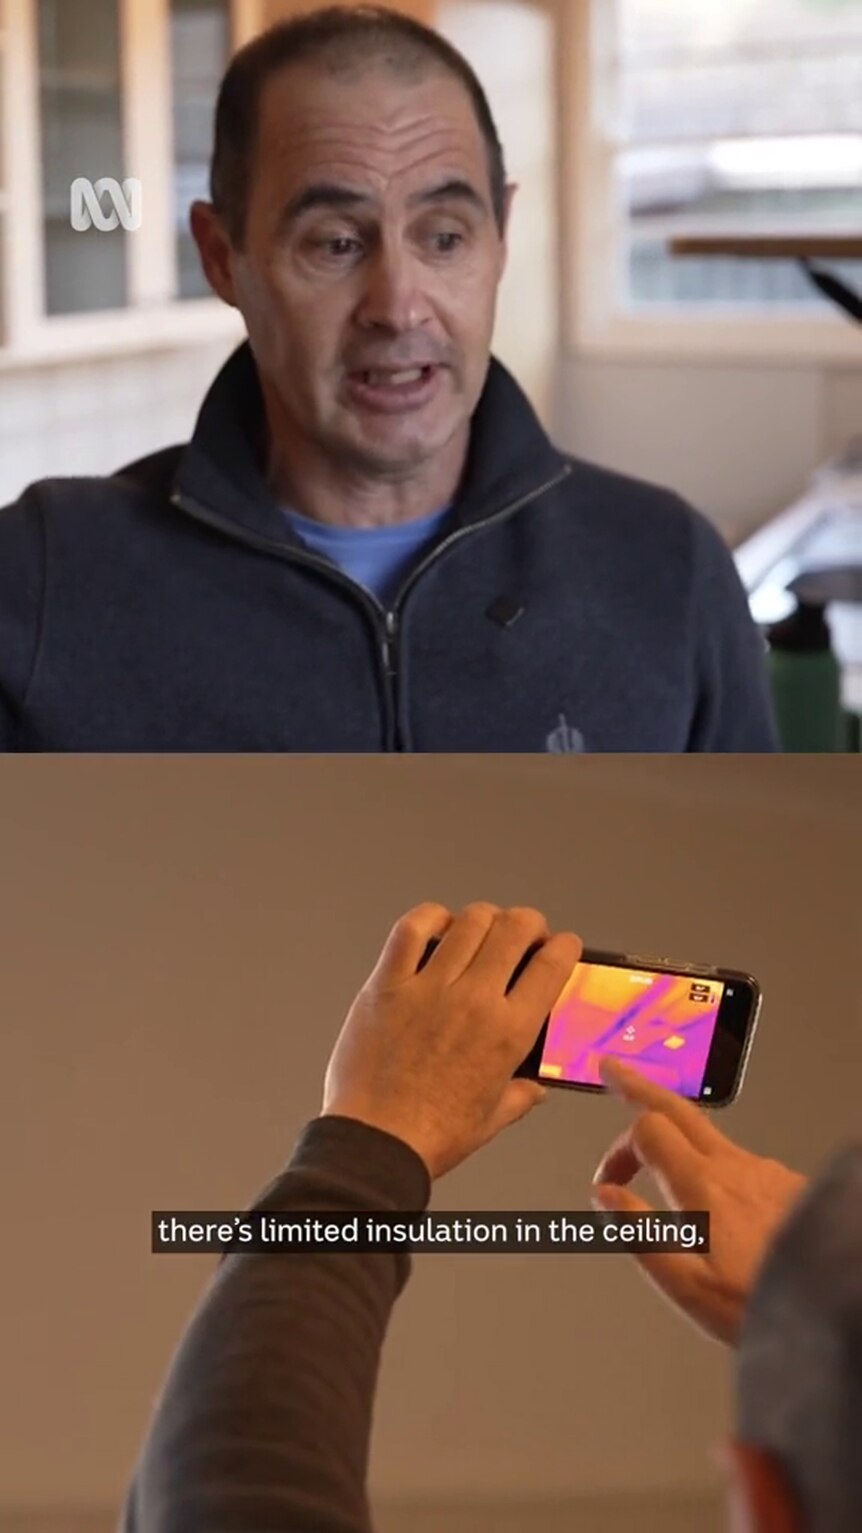 Composite image shows a middle aged man with light-tone skin and a thermal image on a smartphone